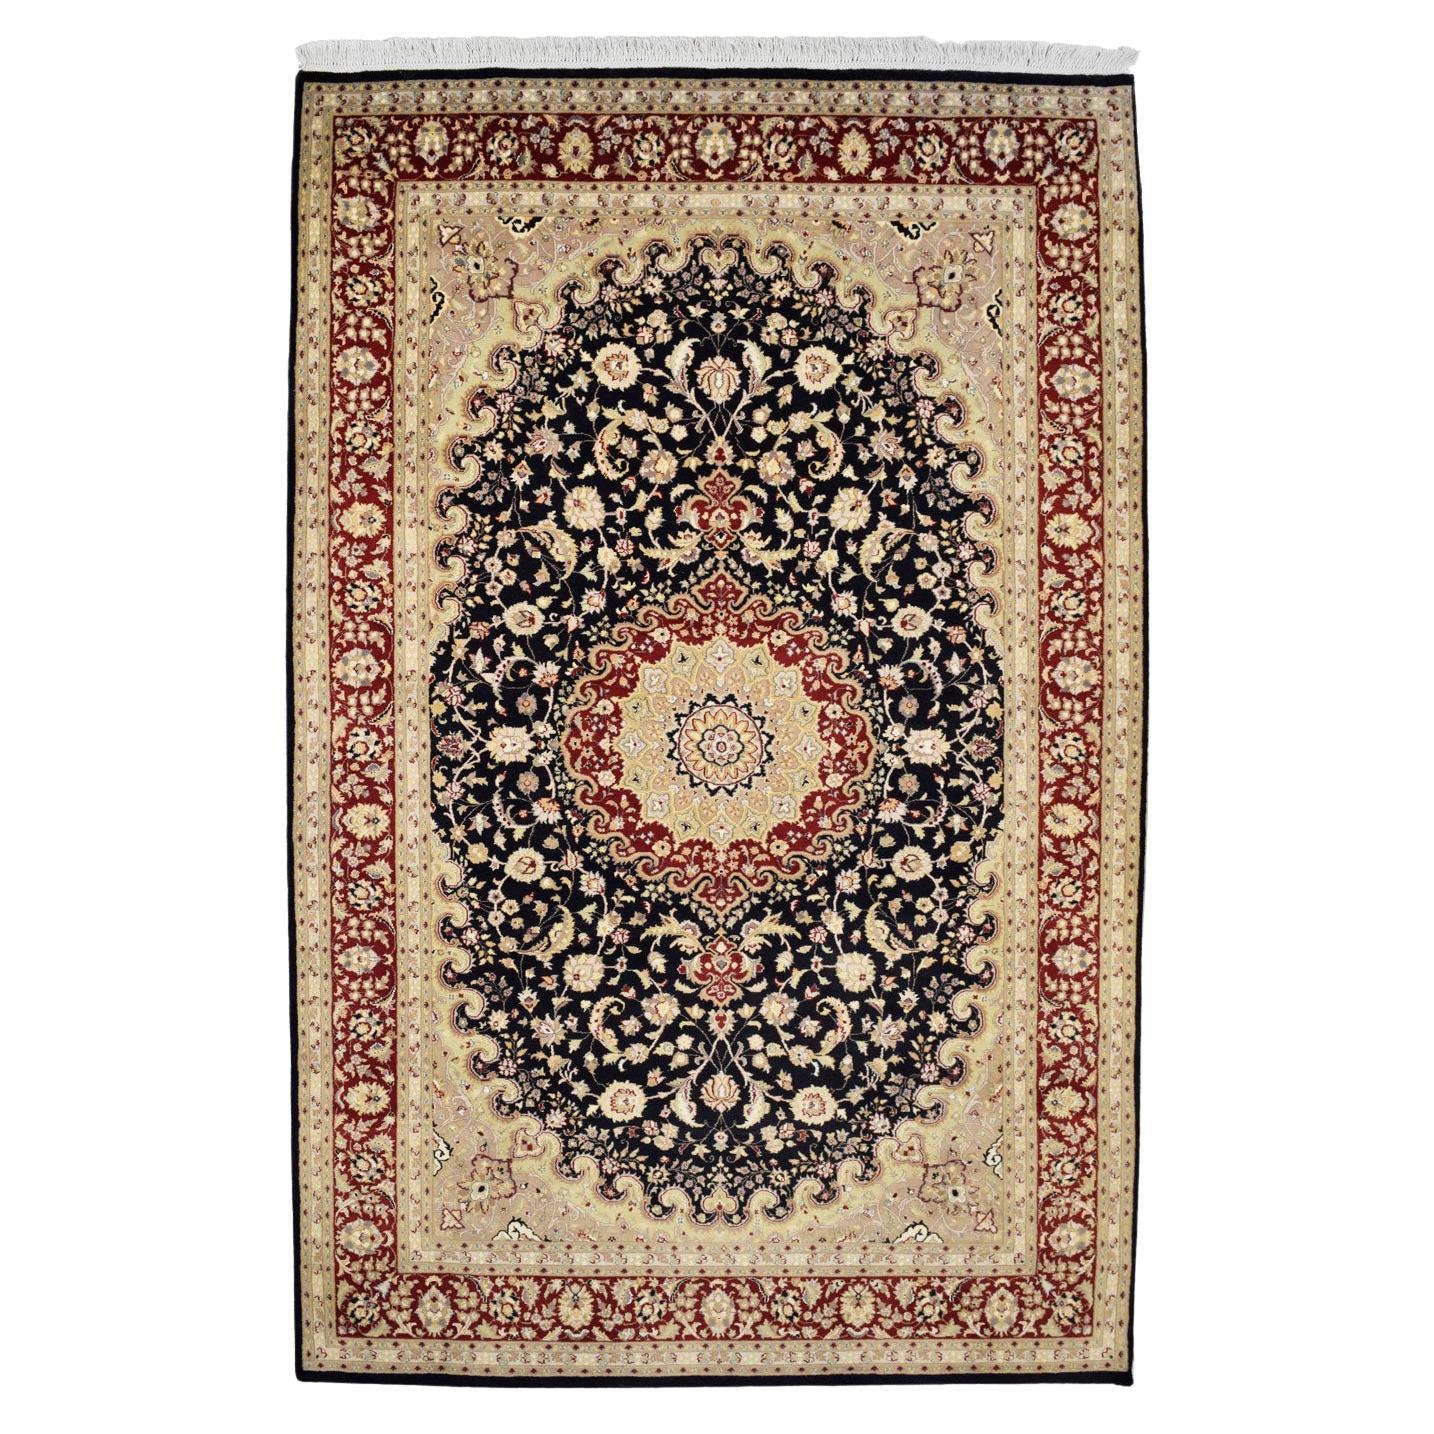 Classic Black, Gold, and Taupe Hand-Knotted Pak-Tabriz Carpet, 6’ x 9’